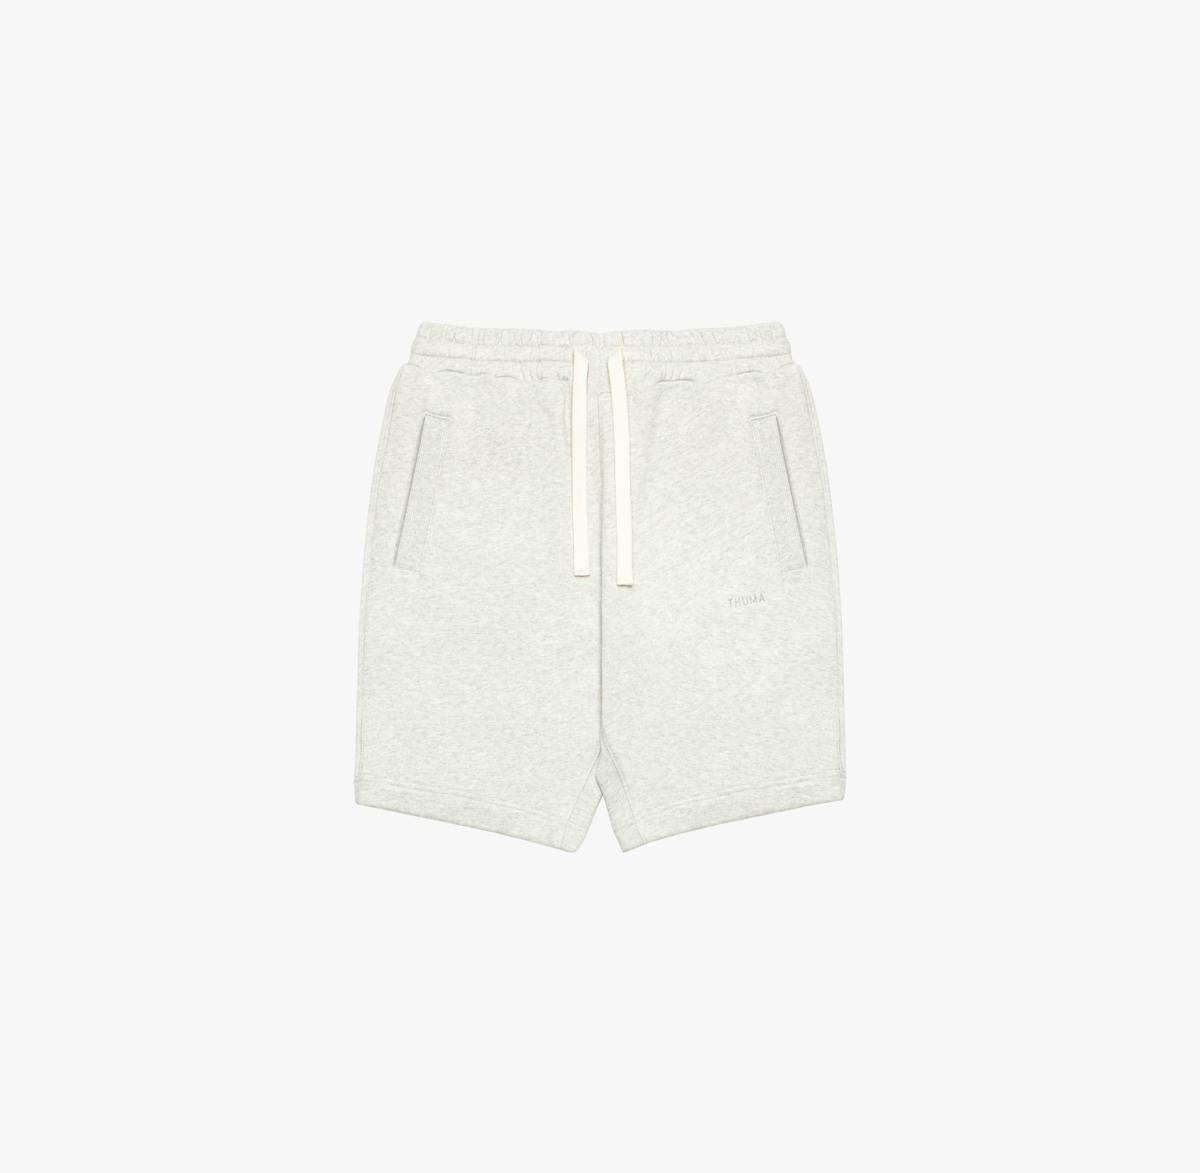 Lounge & Leisure Shorts (Men's Fit / Oatmeal) - Front 